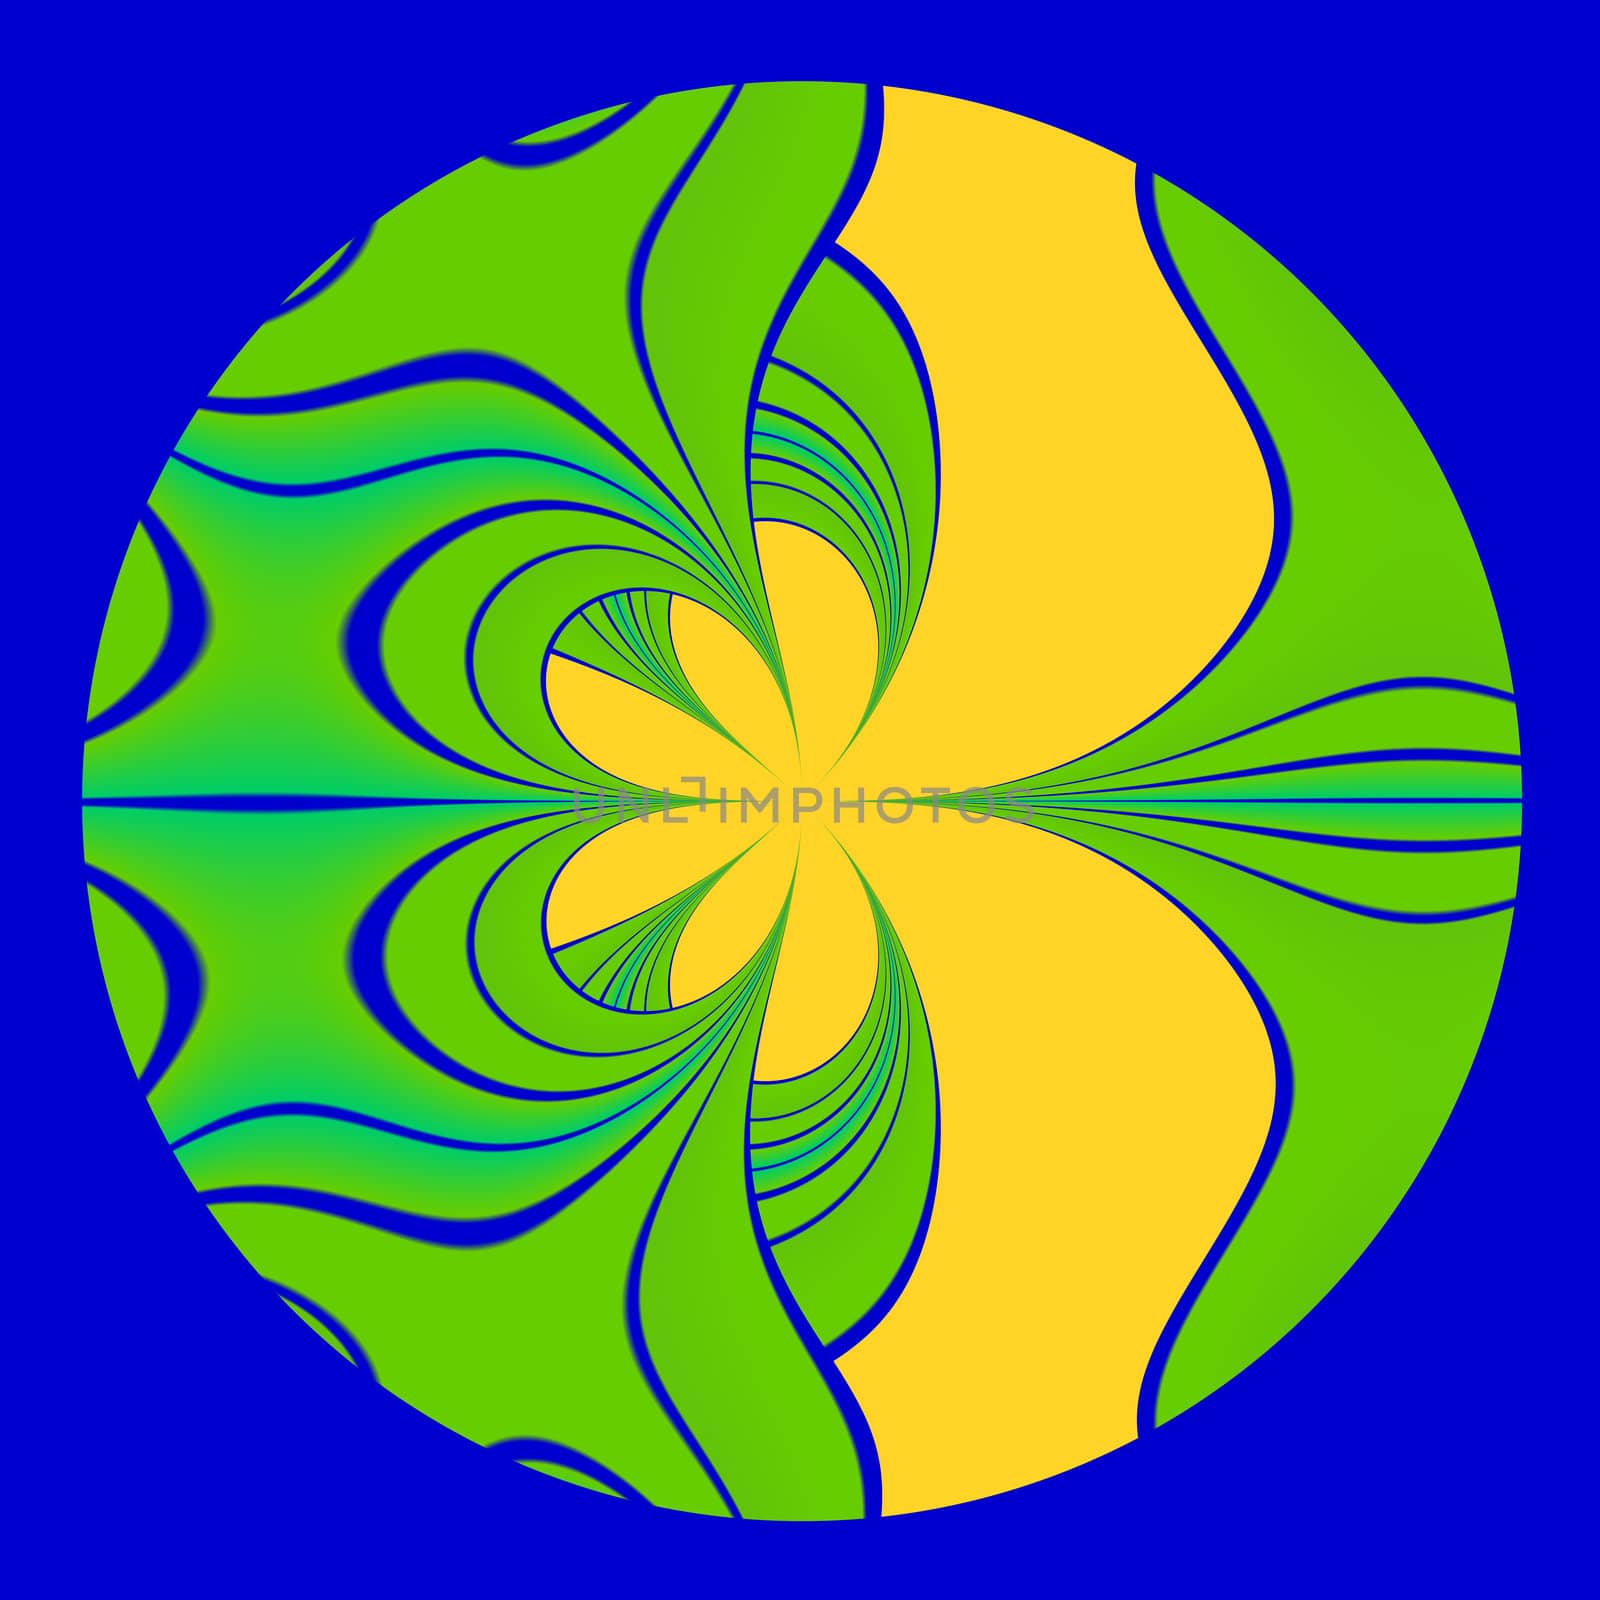 An abstract fractal done in a green and yellow pattern on a blue background.